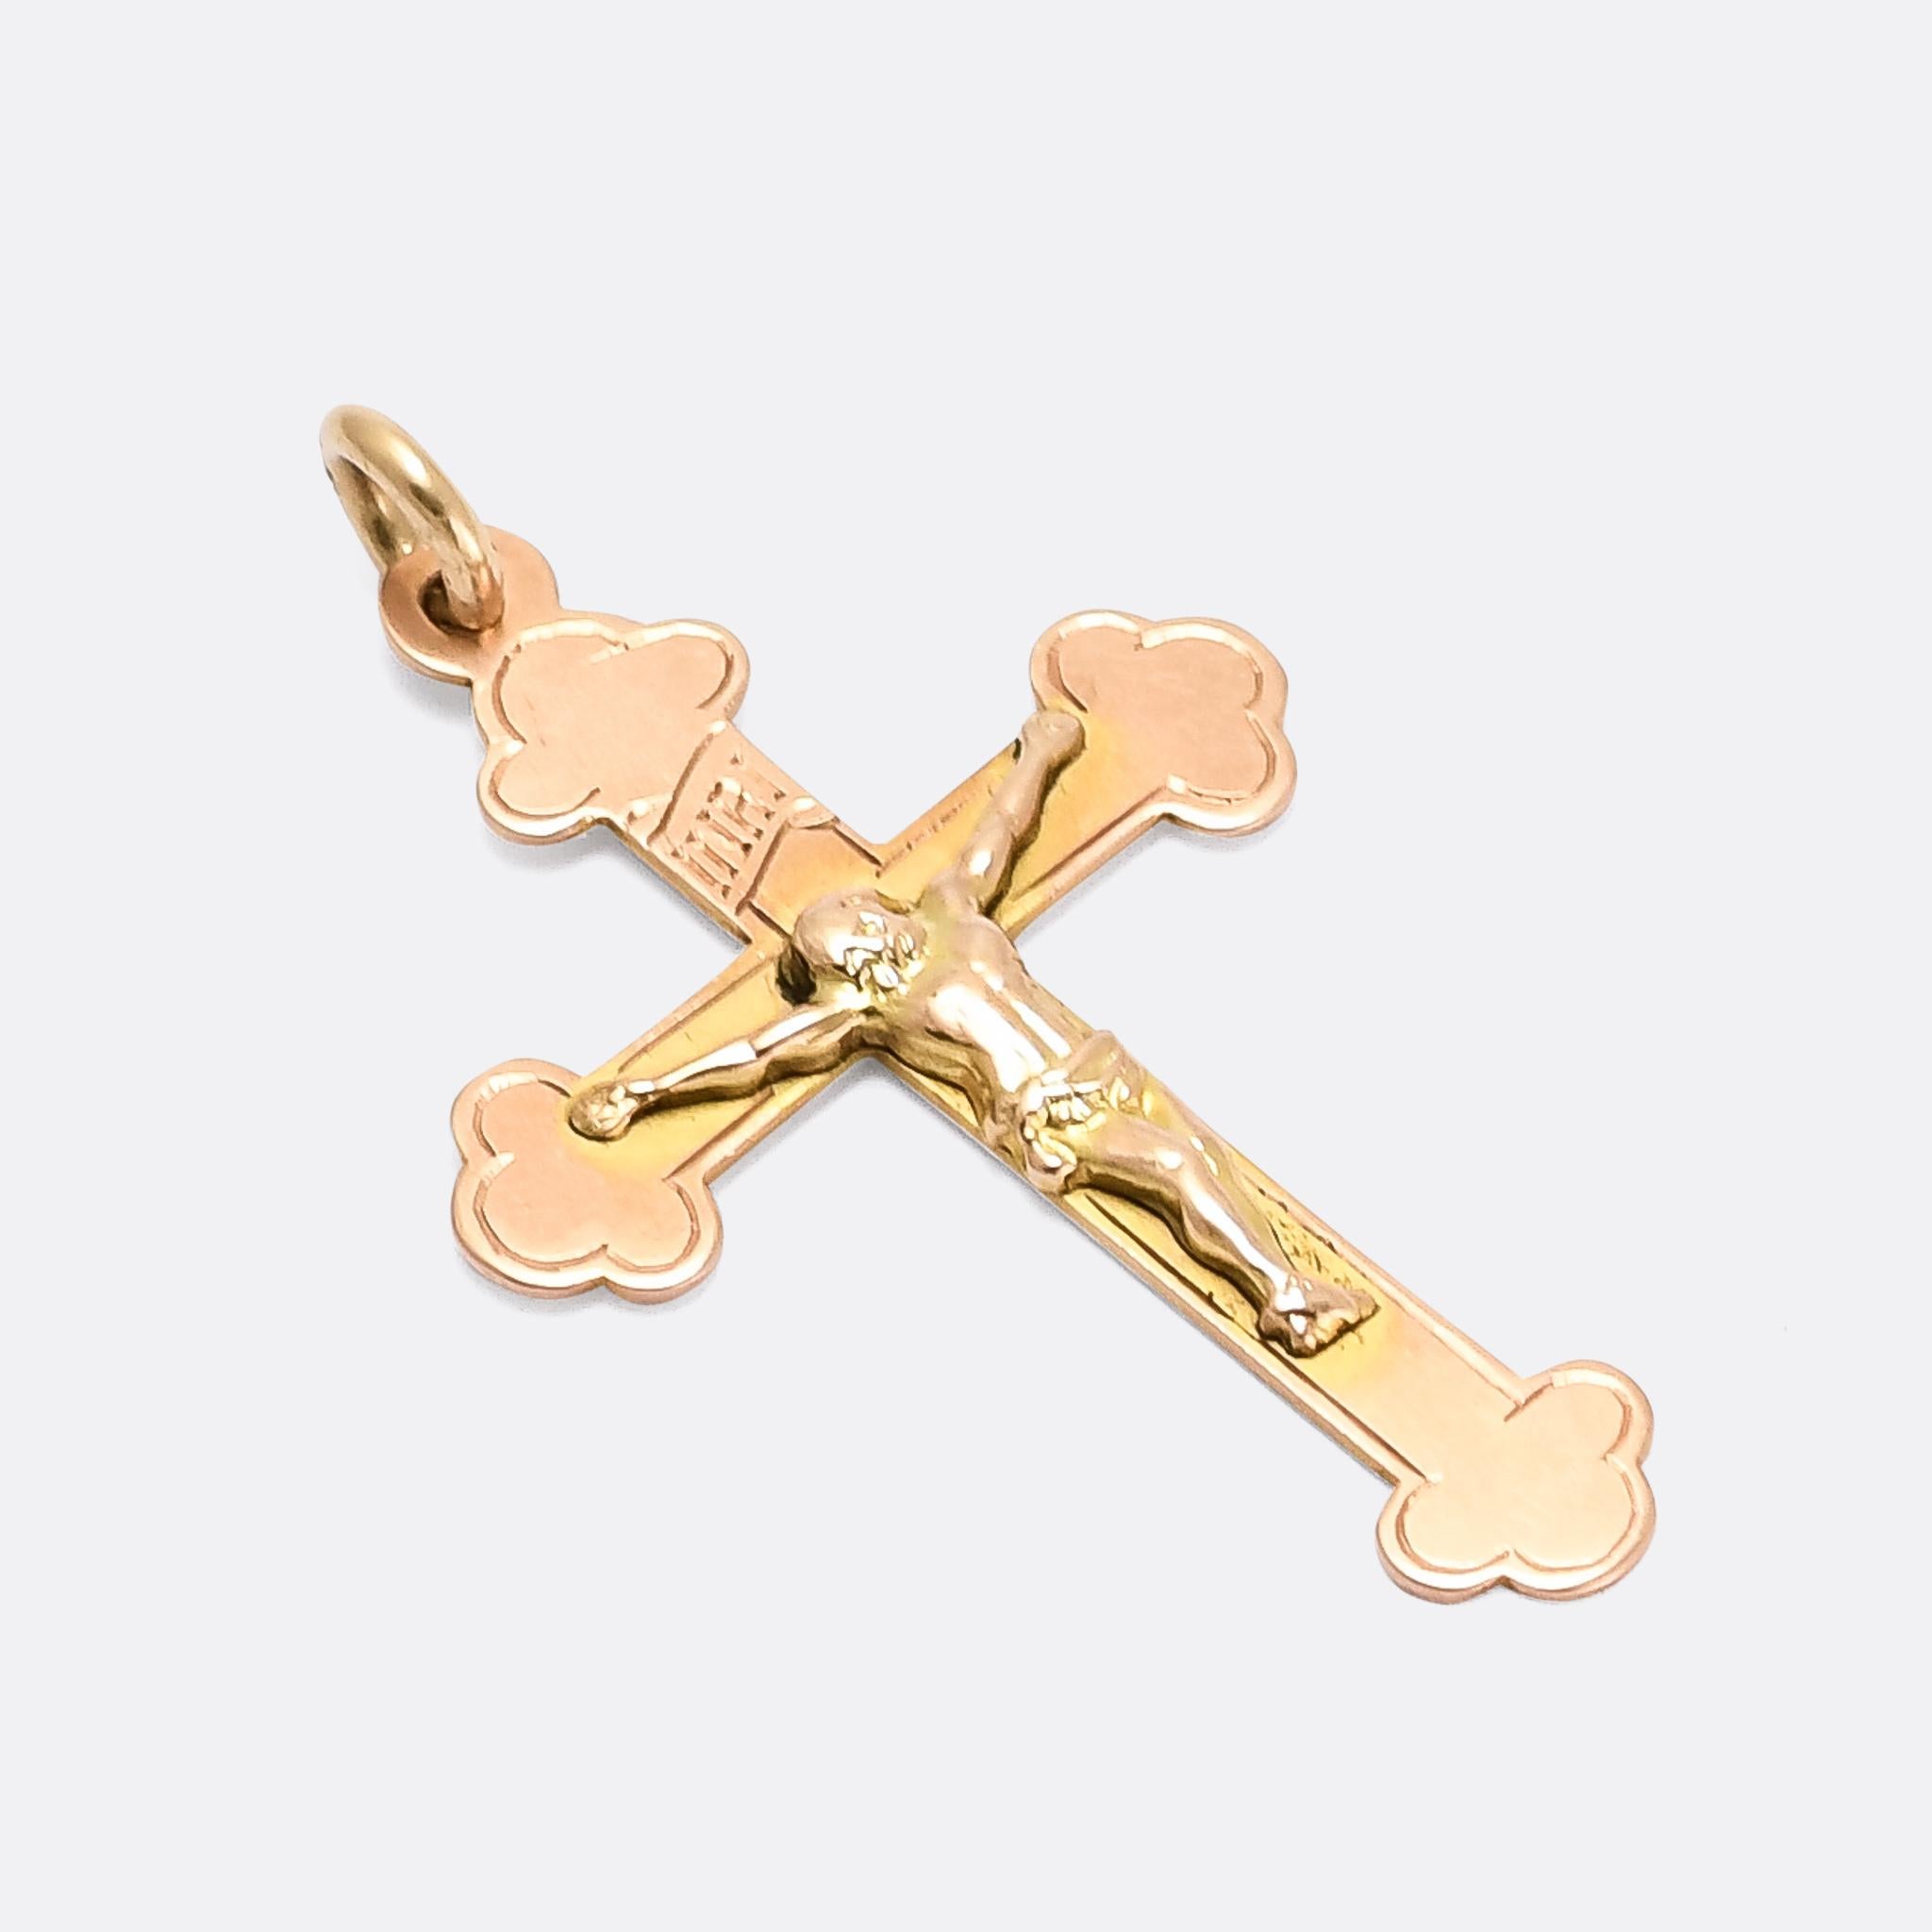 A superb antique crucifix pendant in 9 karat gold. It dates from 1918 - as per the Birmingham hallmarks to the reverse - and features the inscription INRI which represents the Latin inscription: IESVS NAZARENVS REX IVDÆORVM, or 